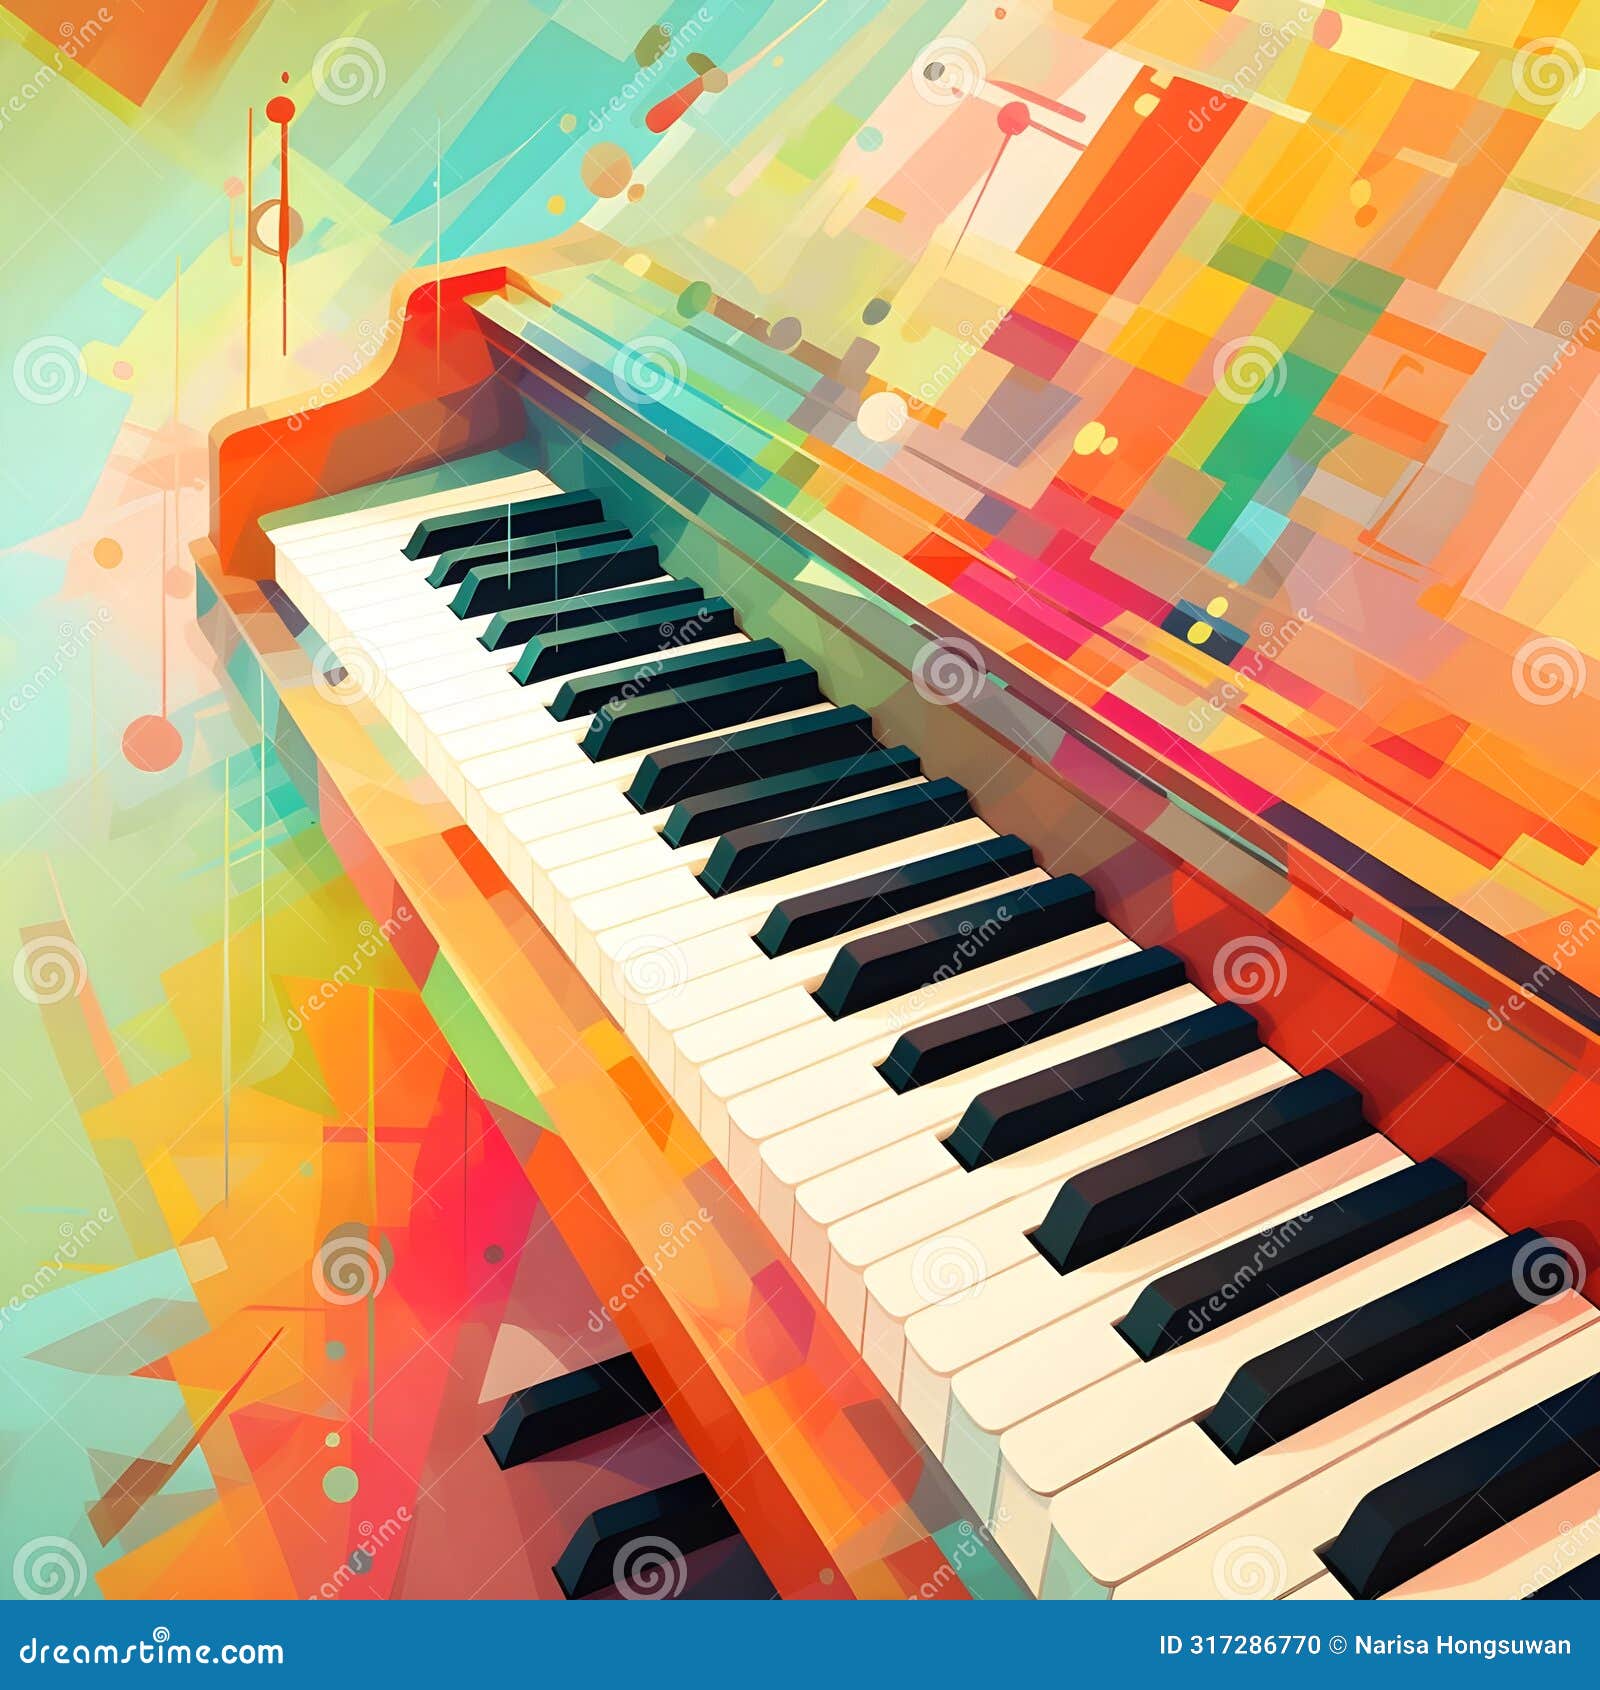 an abstract image of a grand piano that is colorful and bright. abstract colorful paino keyboard keys as wallpaper background